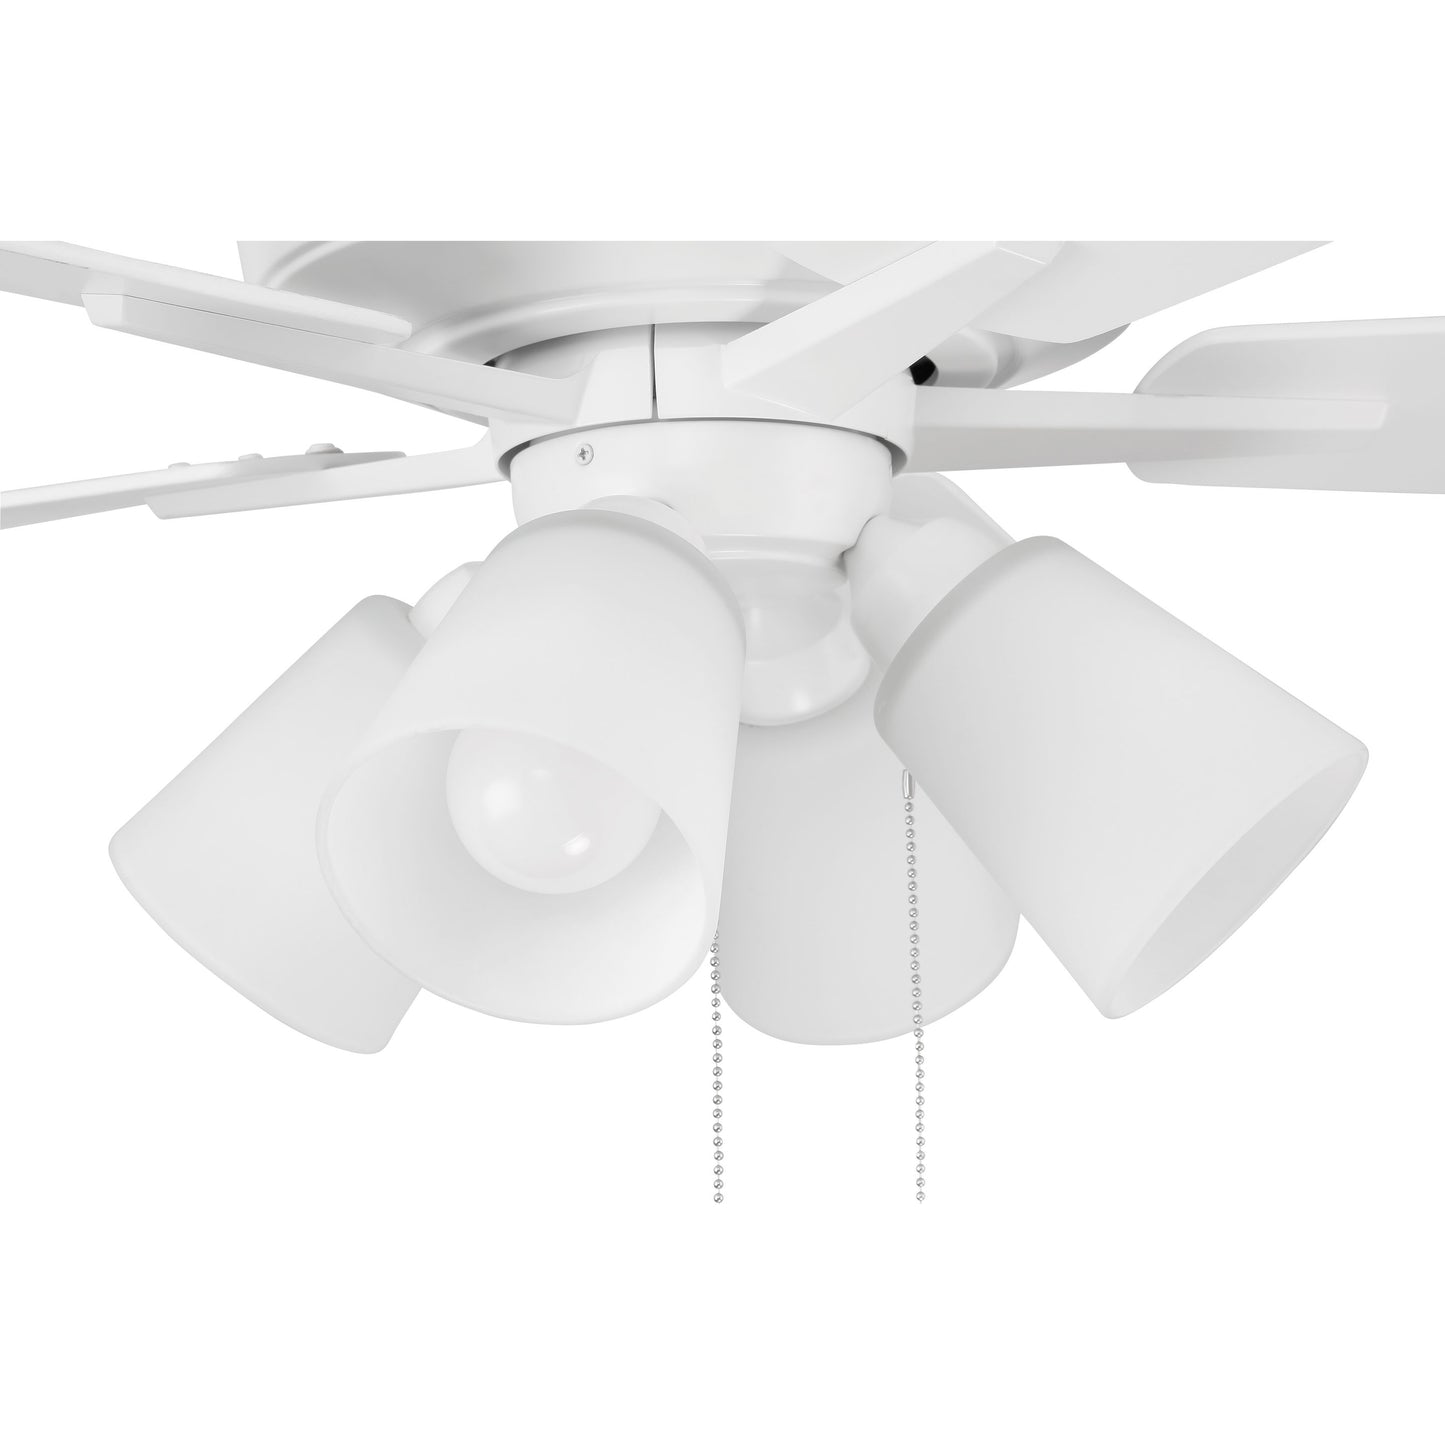 S114W5-60WWOK - Super Pro 114 60" 5 Blade Ceiling Fan with Light Kit - Pull Chain - White